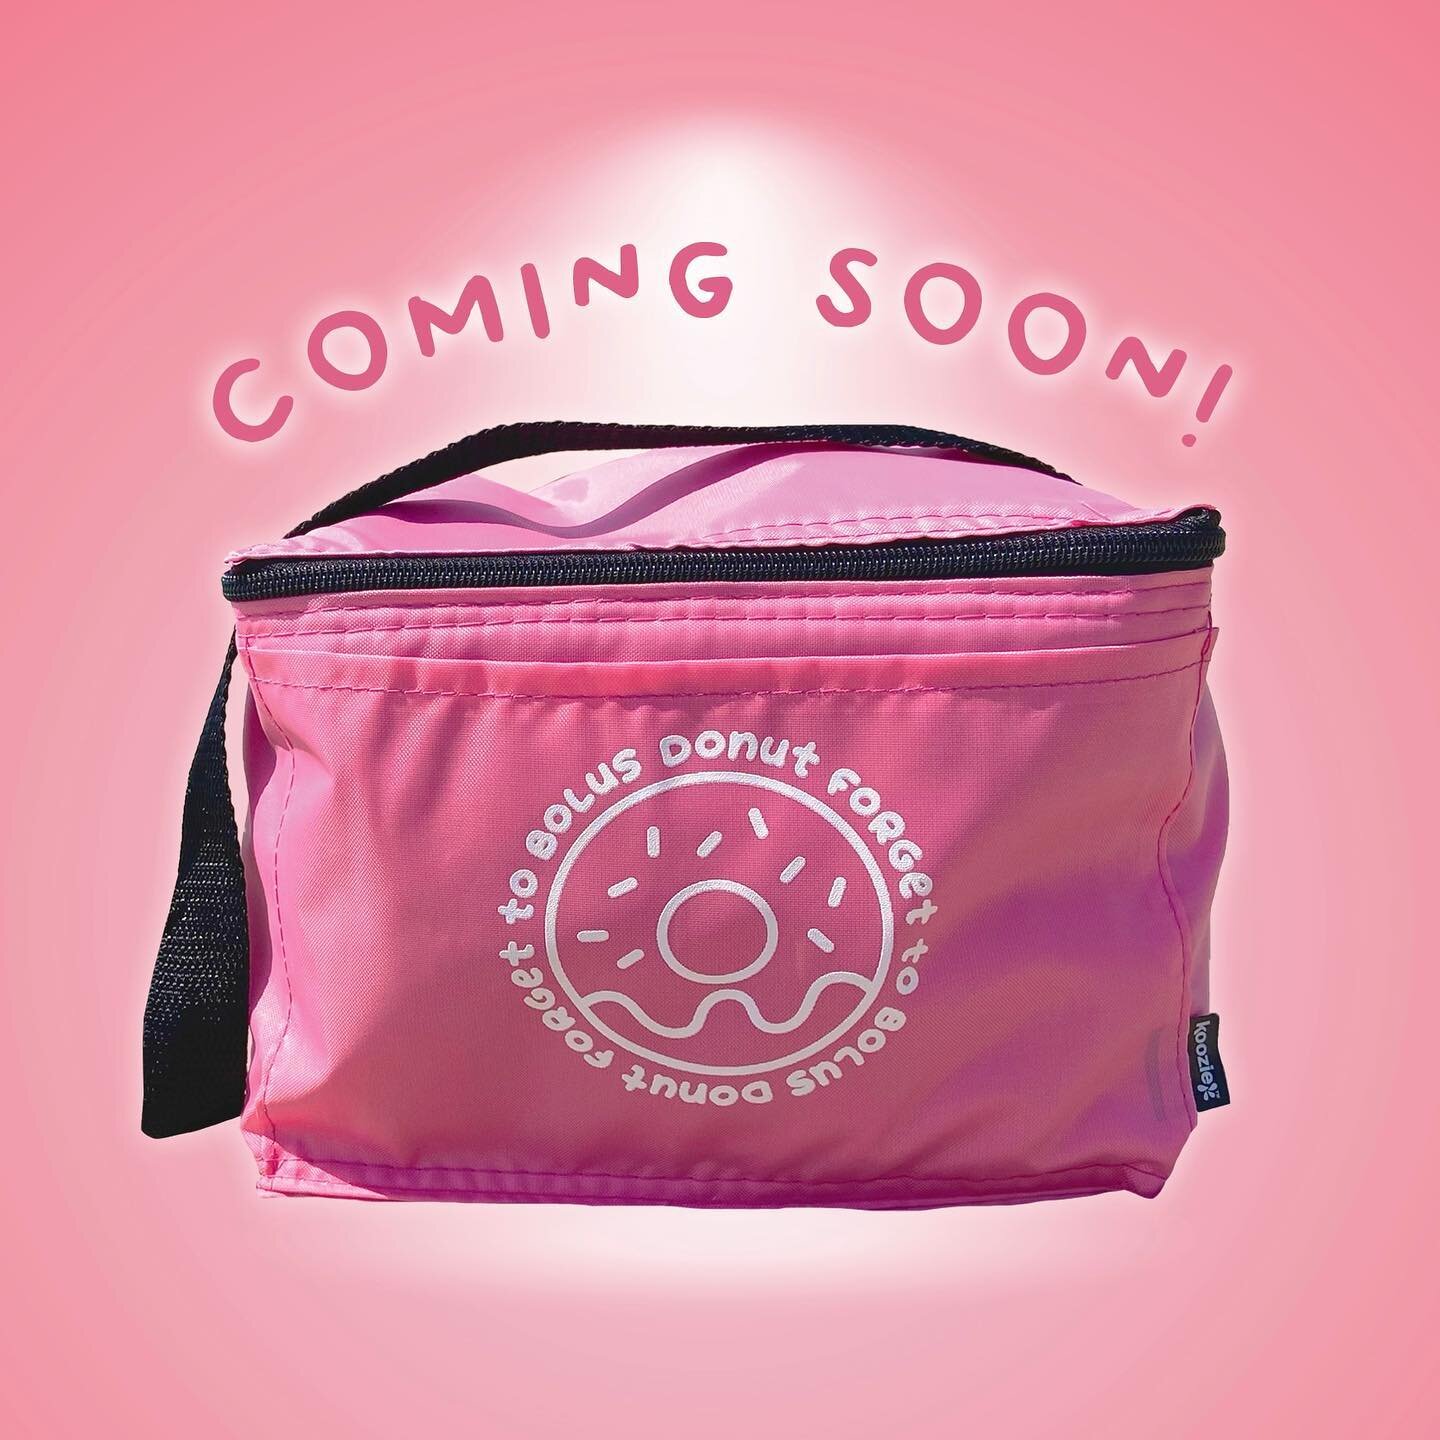 New product coming very soon! Pink &ldquo;Donut Forget To Bolus&rdquo; cooler bags☀️🏖 Store your insulin and snacks in style!🍩 
#t1d #typeonediabetes #typeone #t1dstyle #diabetes #diabetic #typeonediabetic #bolus